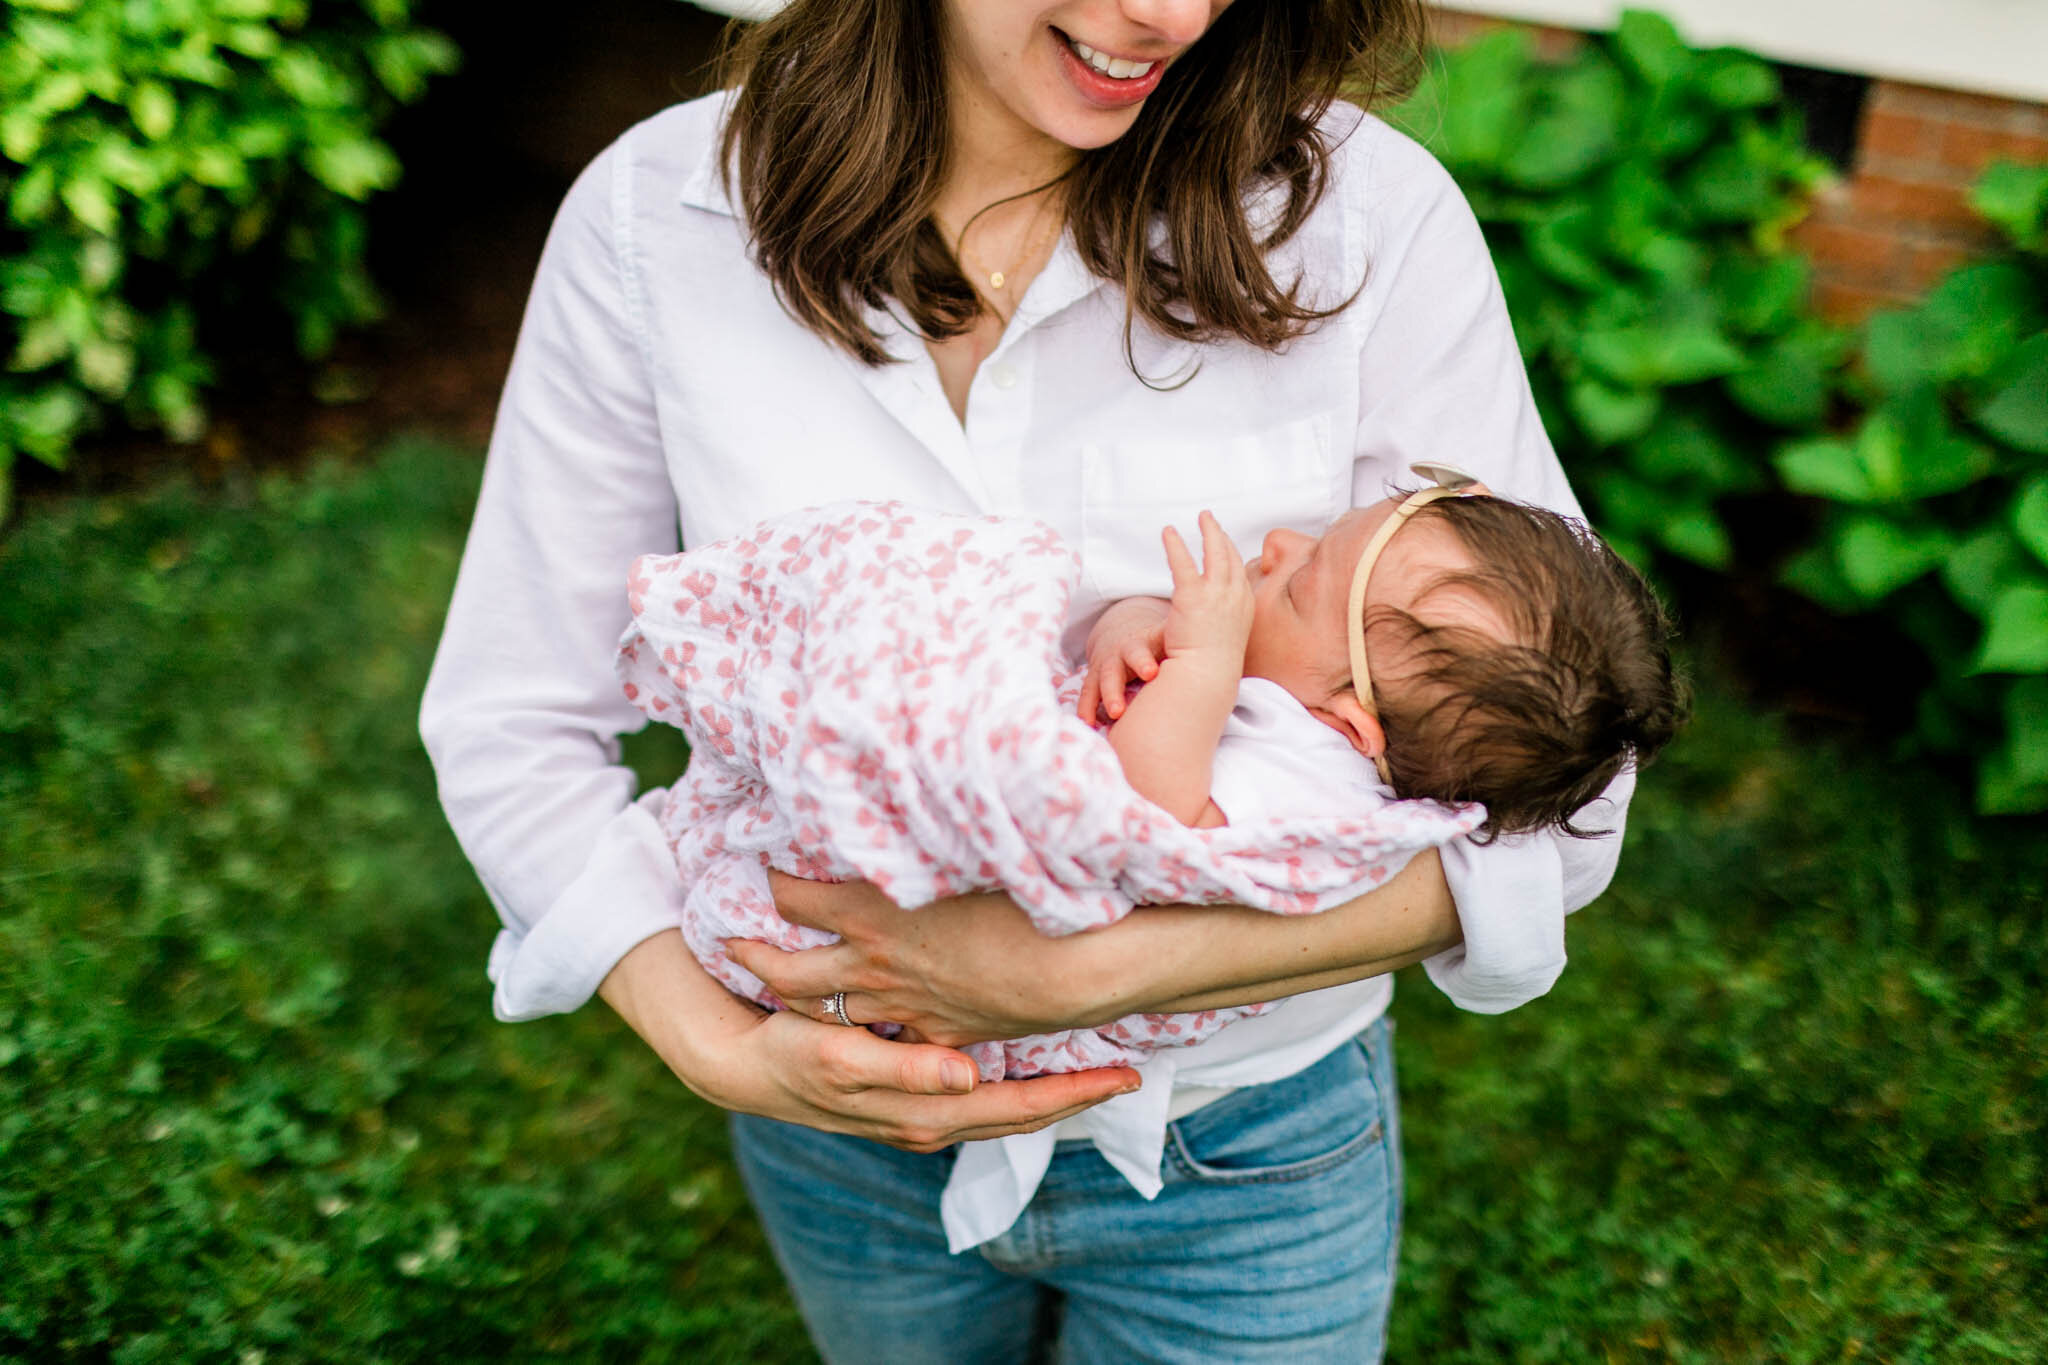 Durham Newborn Photographer | By G. Lin Photography | Mother holding baby in arms outside on grass